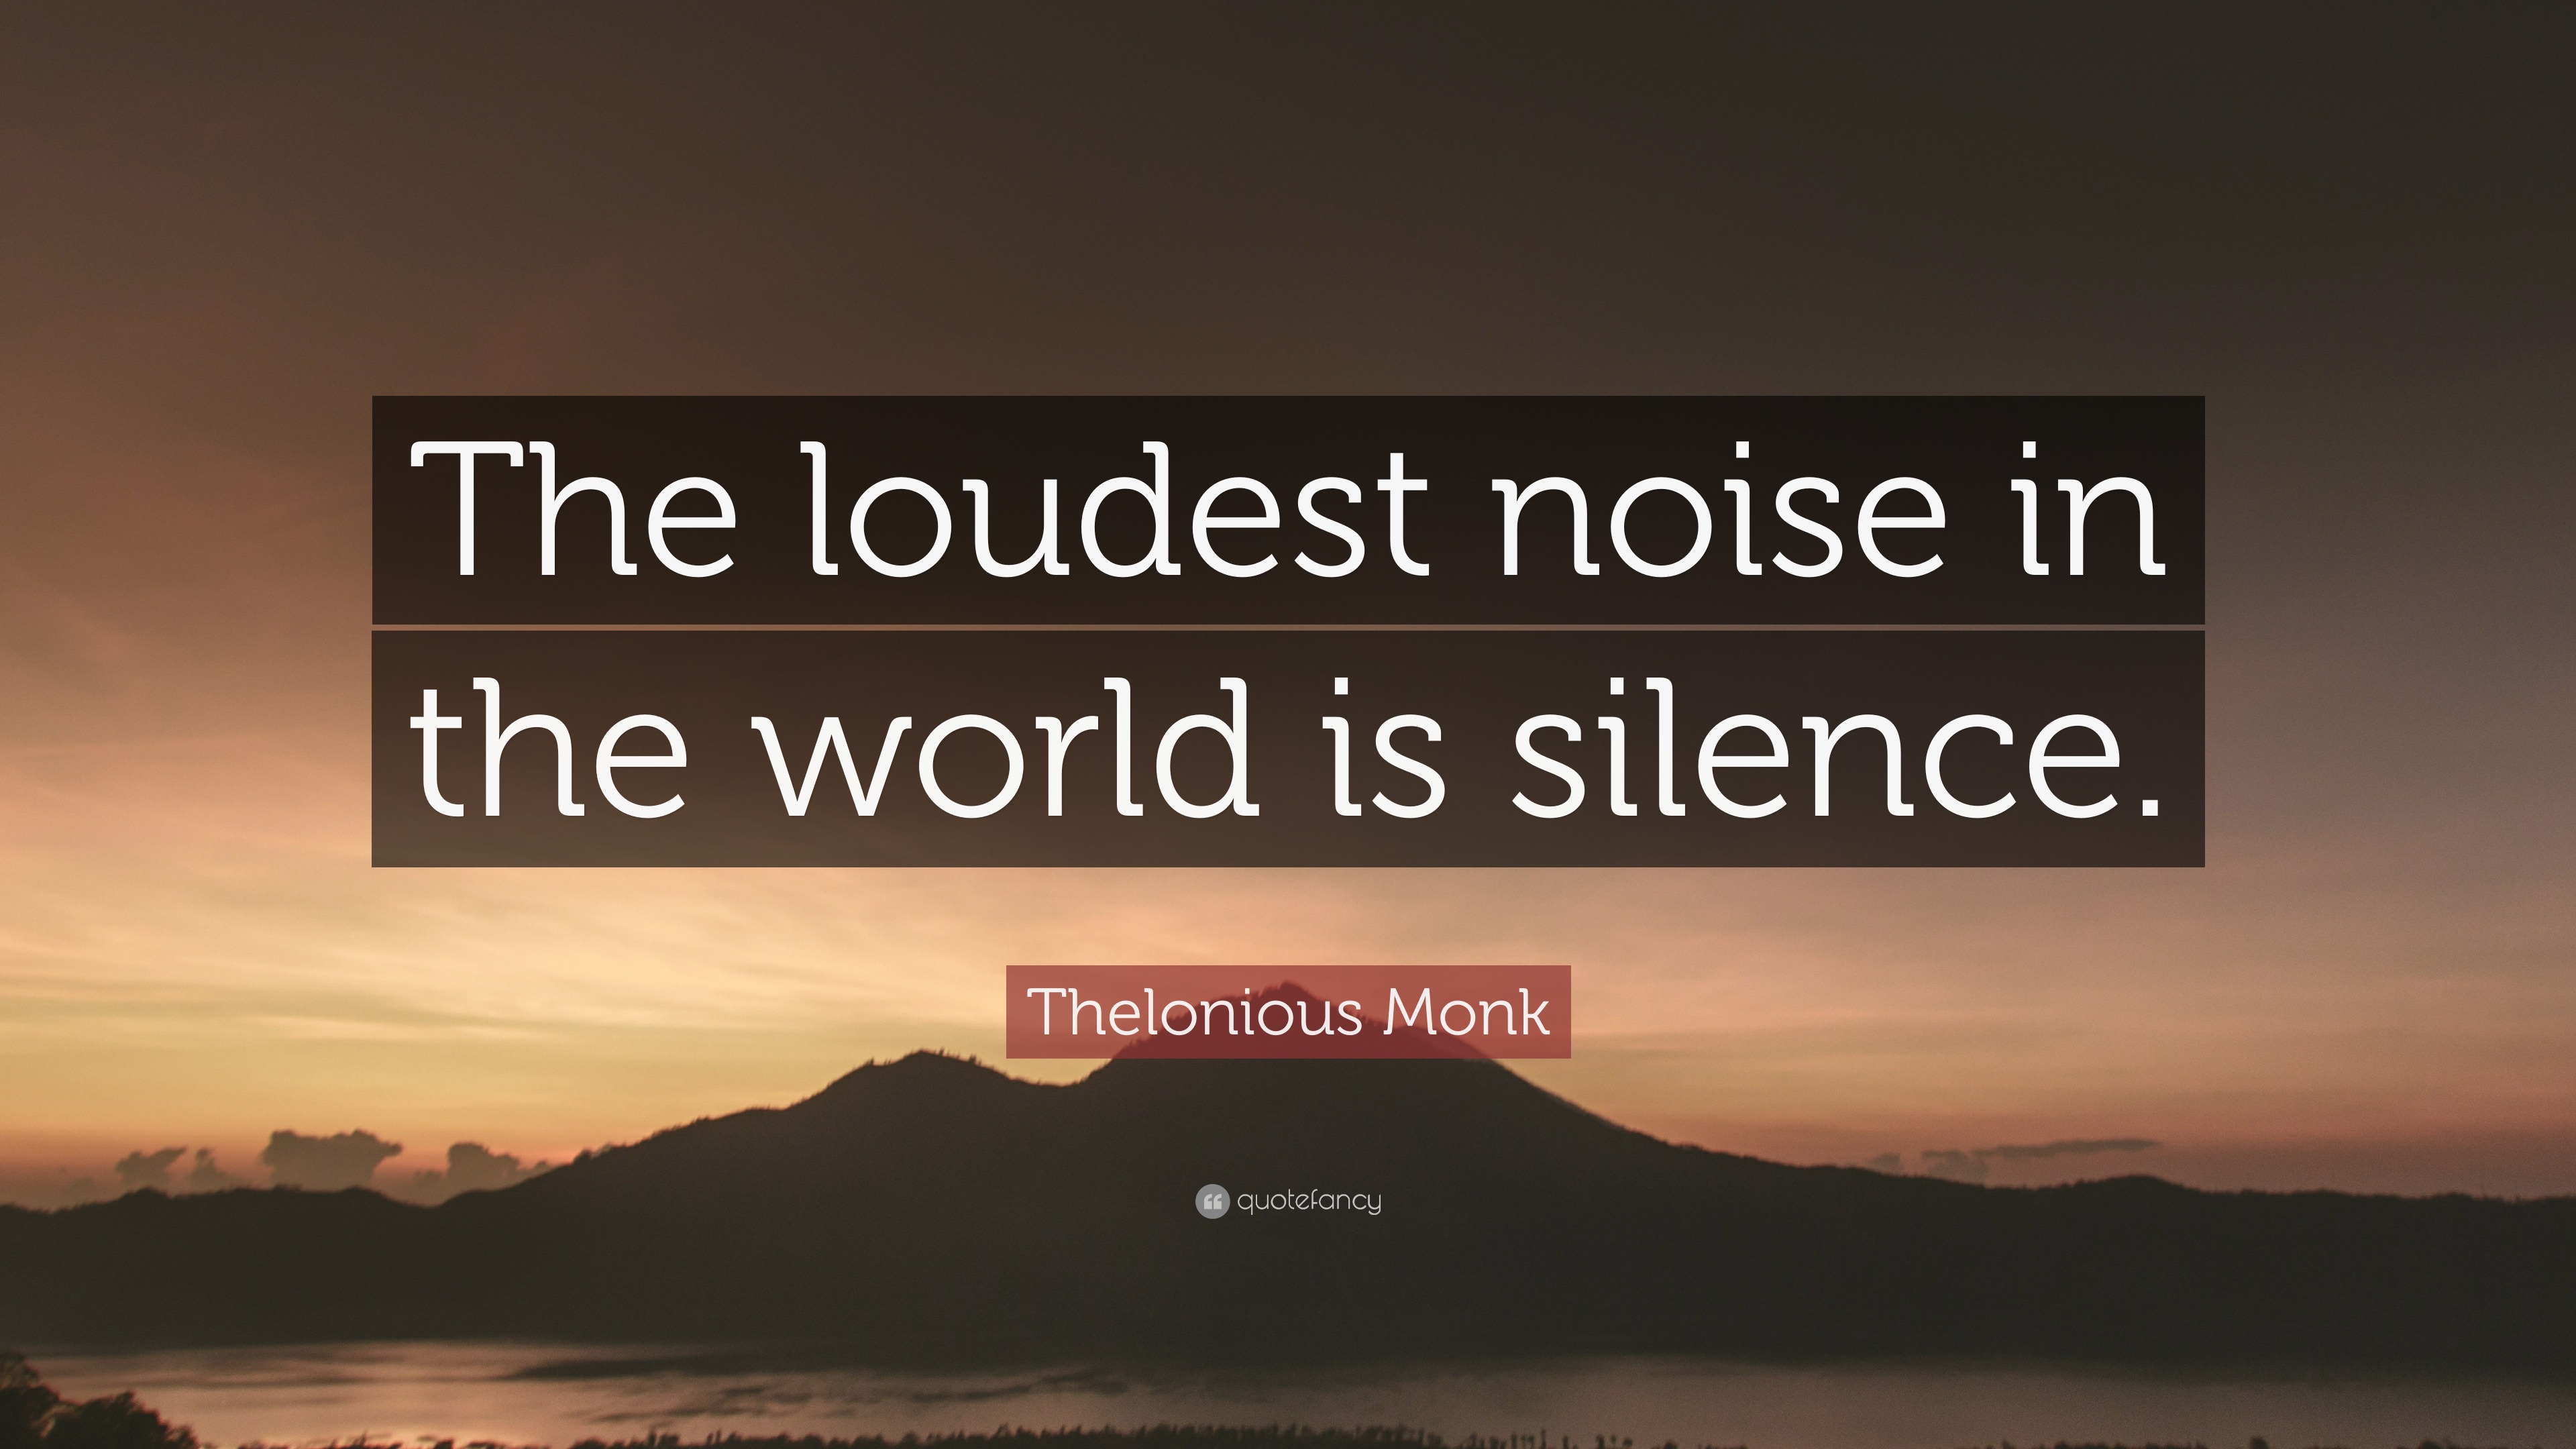 Thelonious Monk Quote: “The loudest noise in the world is silence.”